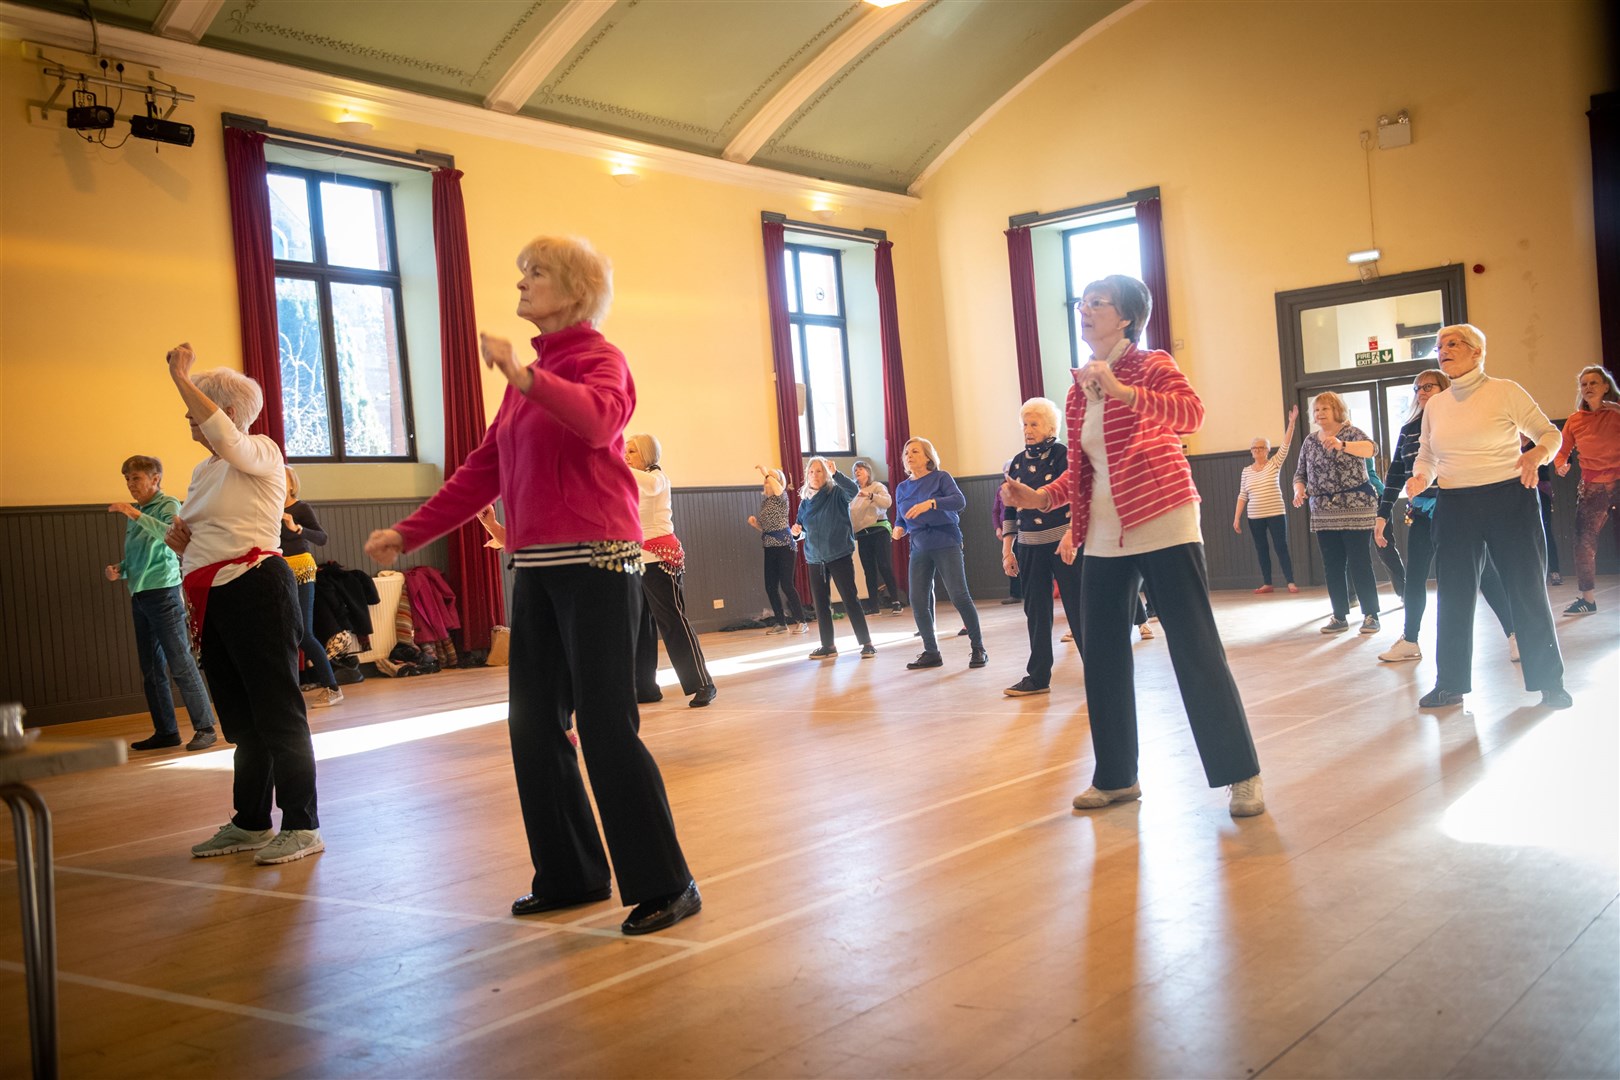 Movement to music at the fitness class. Picture: Callum Mackay.